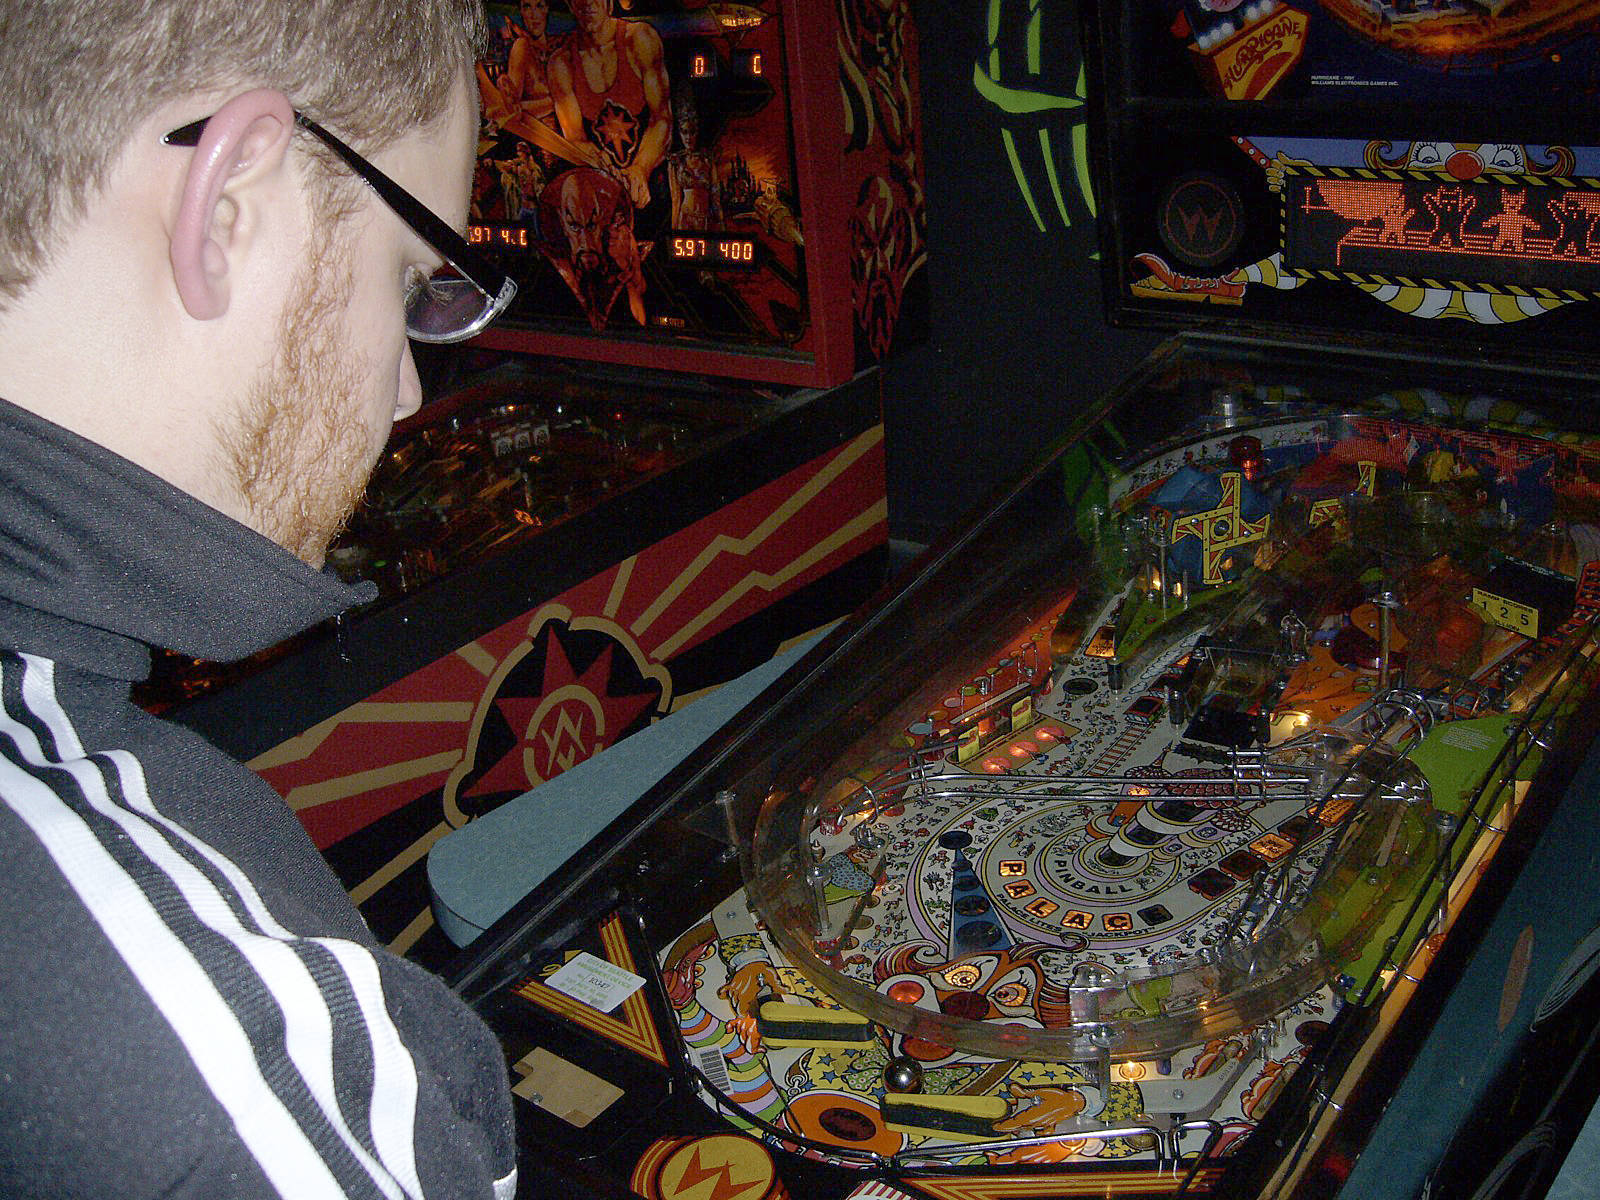 Pinball at Shorty’s. Photo by Clayton Parker/Flickr